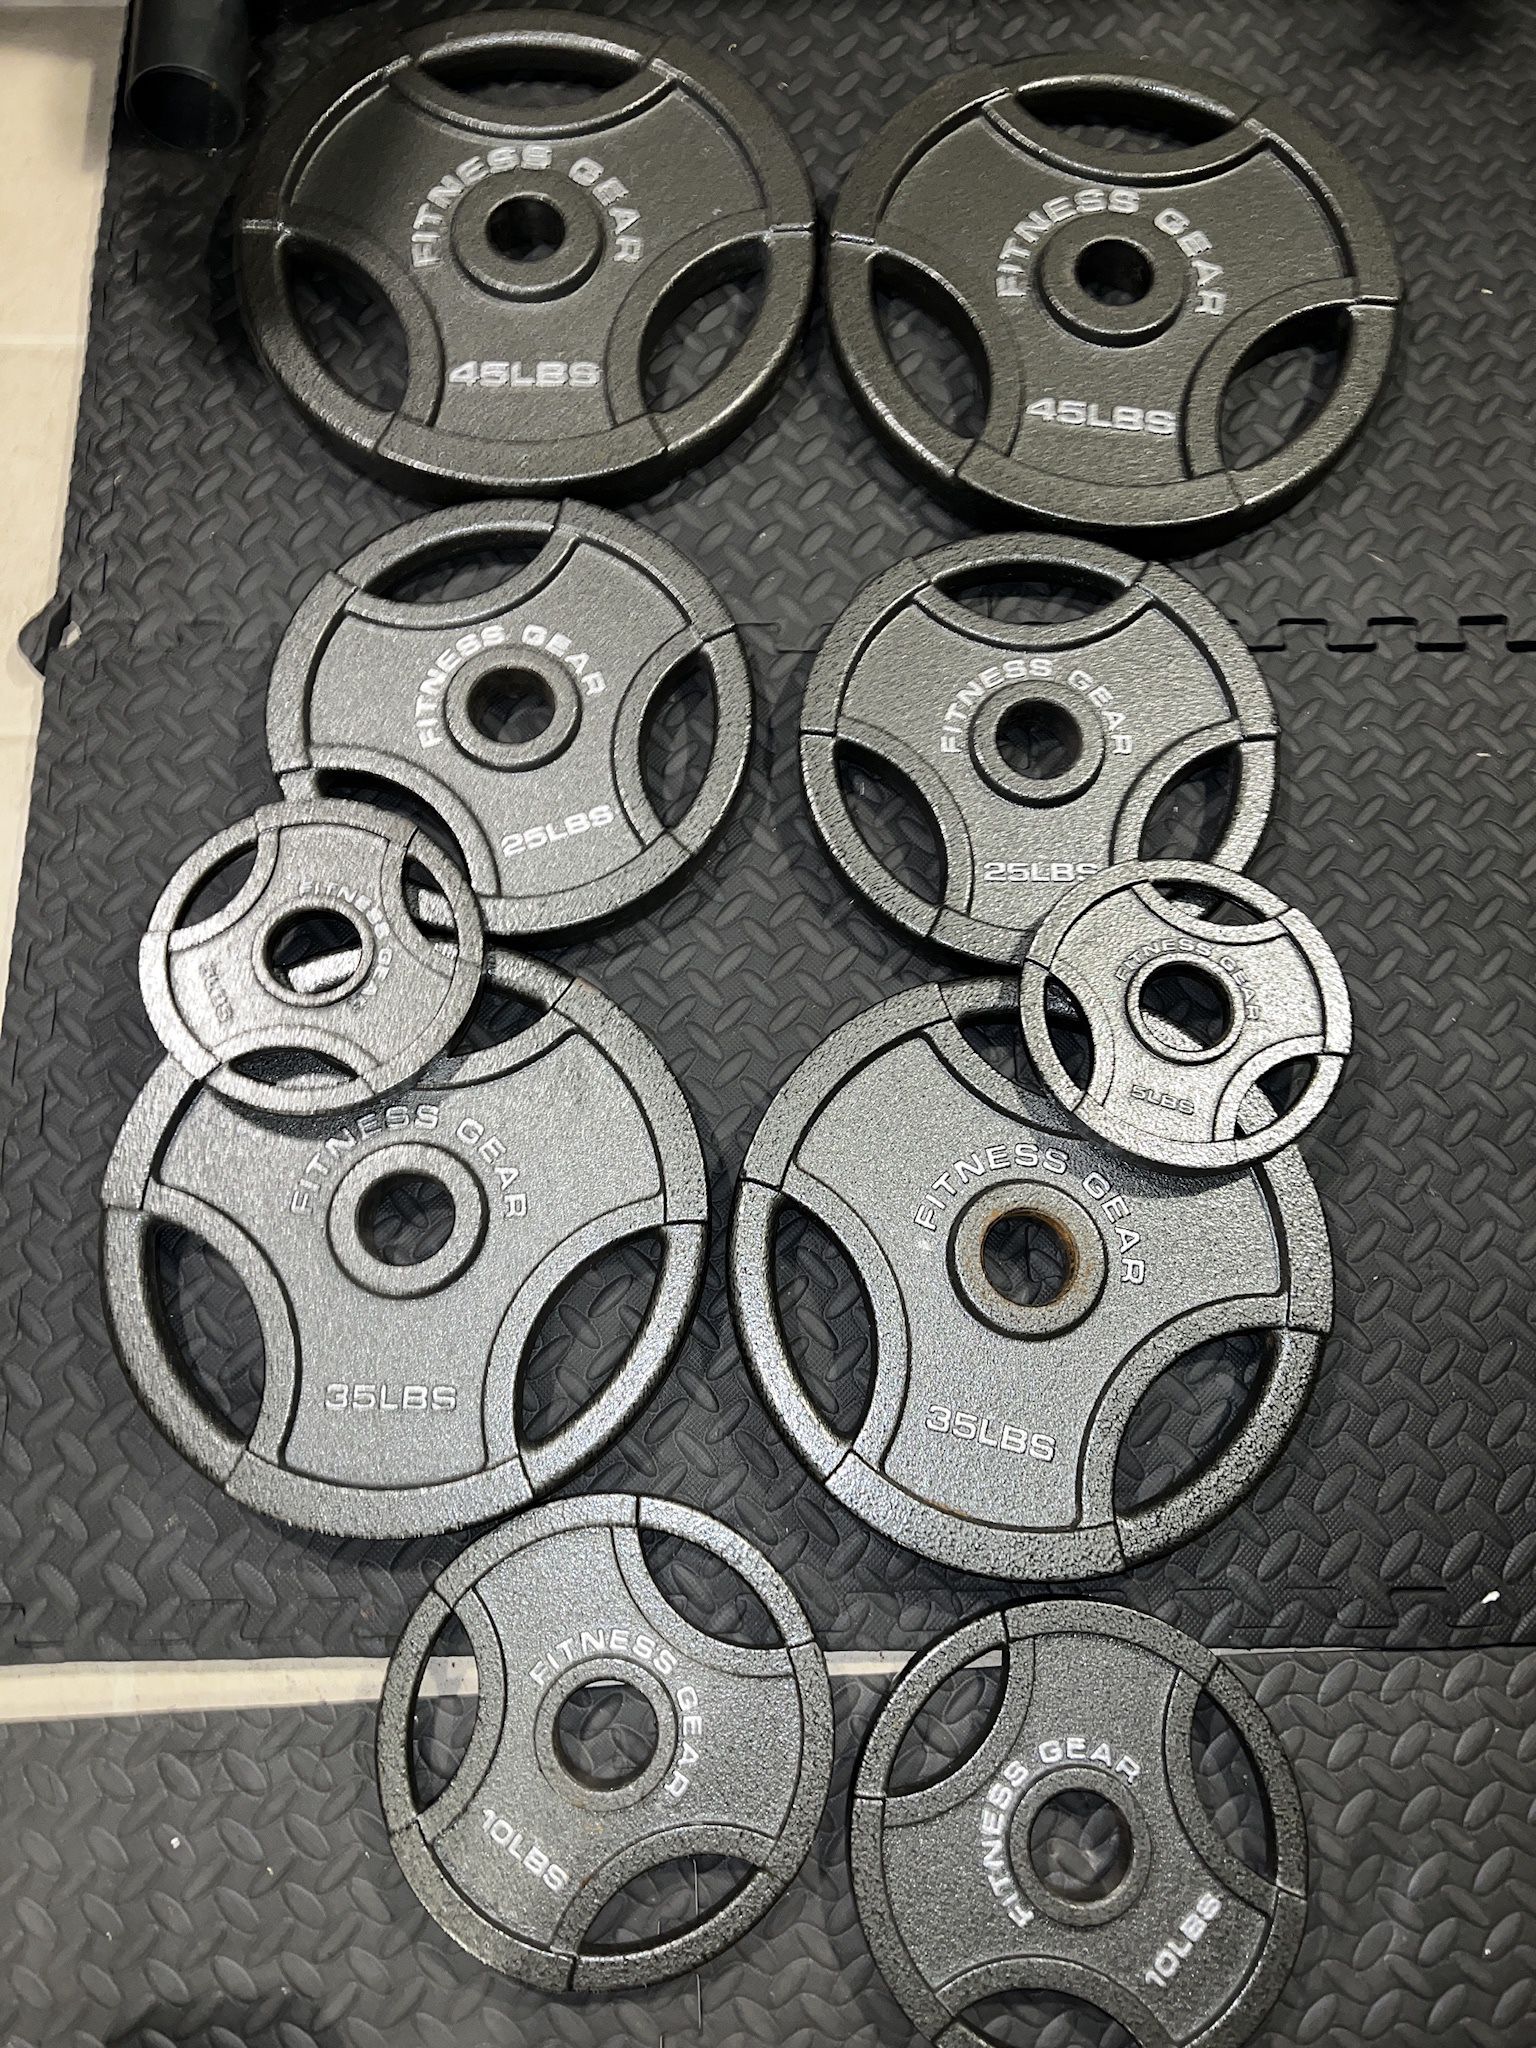 Fitness Gear Olympic Size Weights 45 Pound Plates  35 25 10 5 2.5